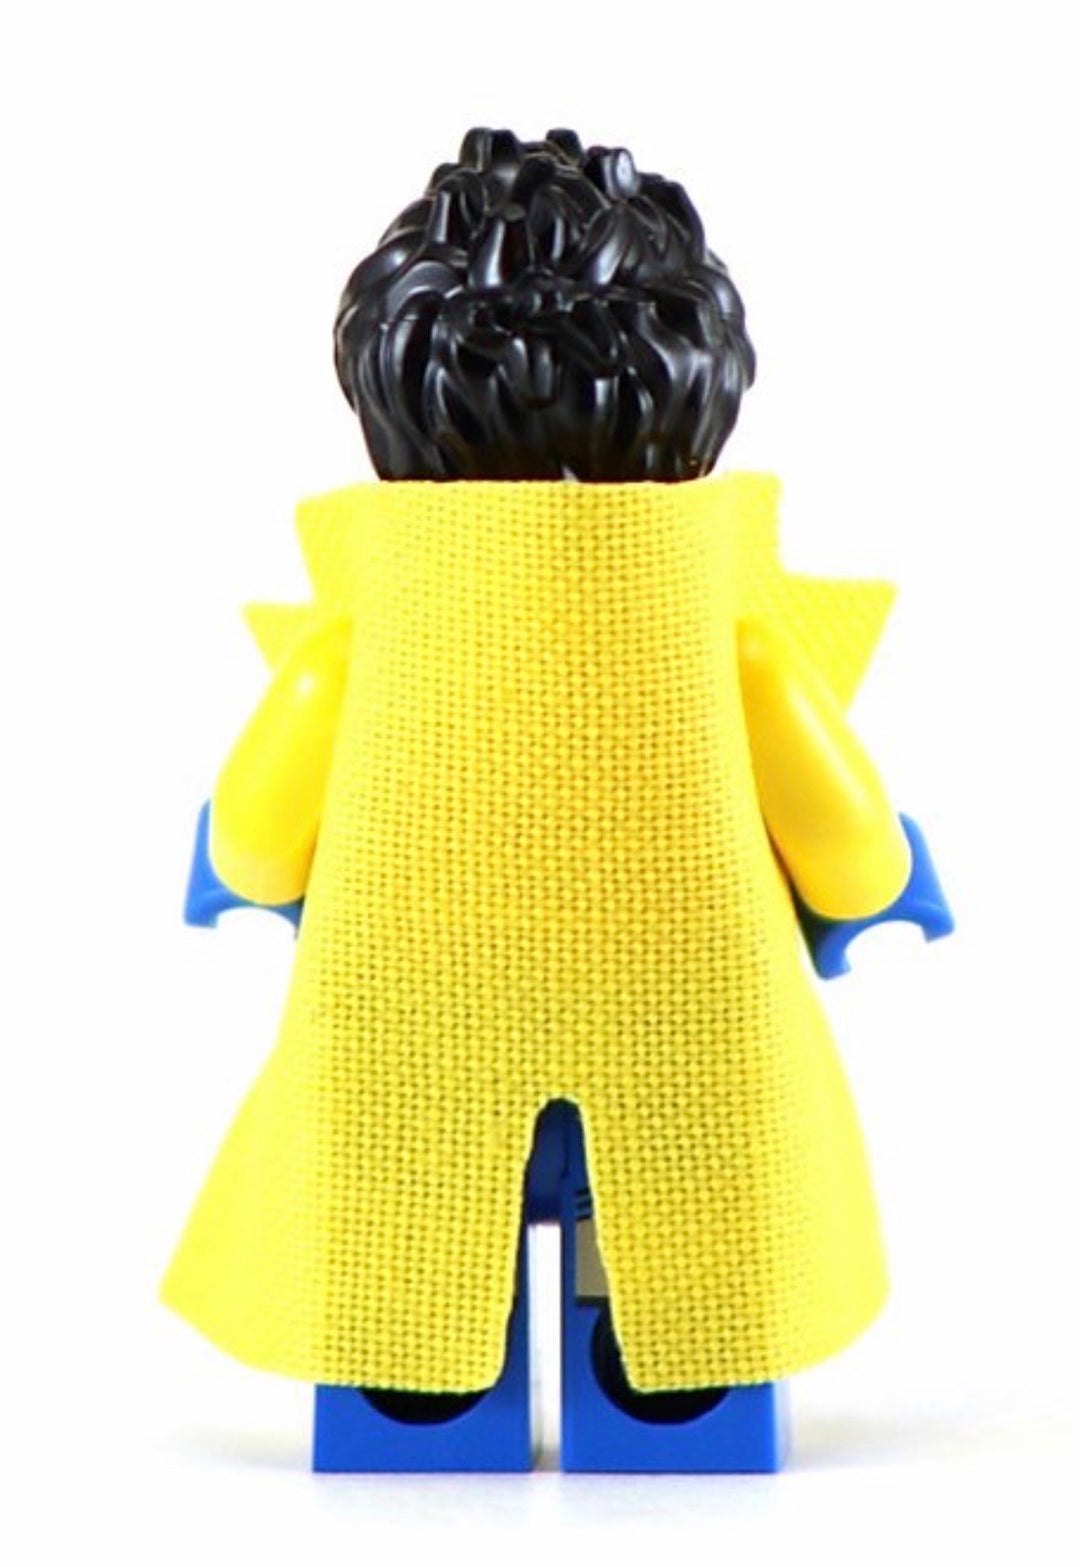 CITY LEGO Minifigure Man Boy w Classic Space Shirt Rare + Collectable  Minifig